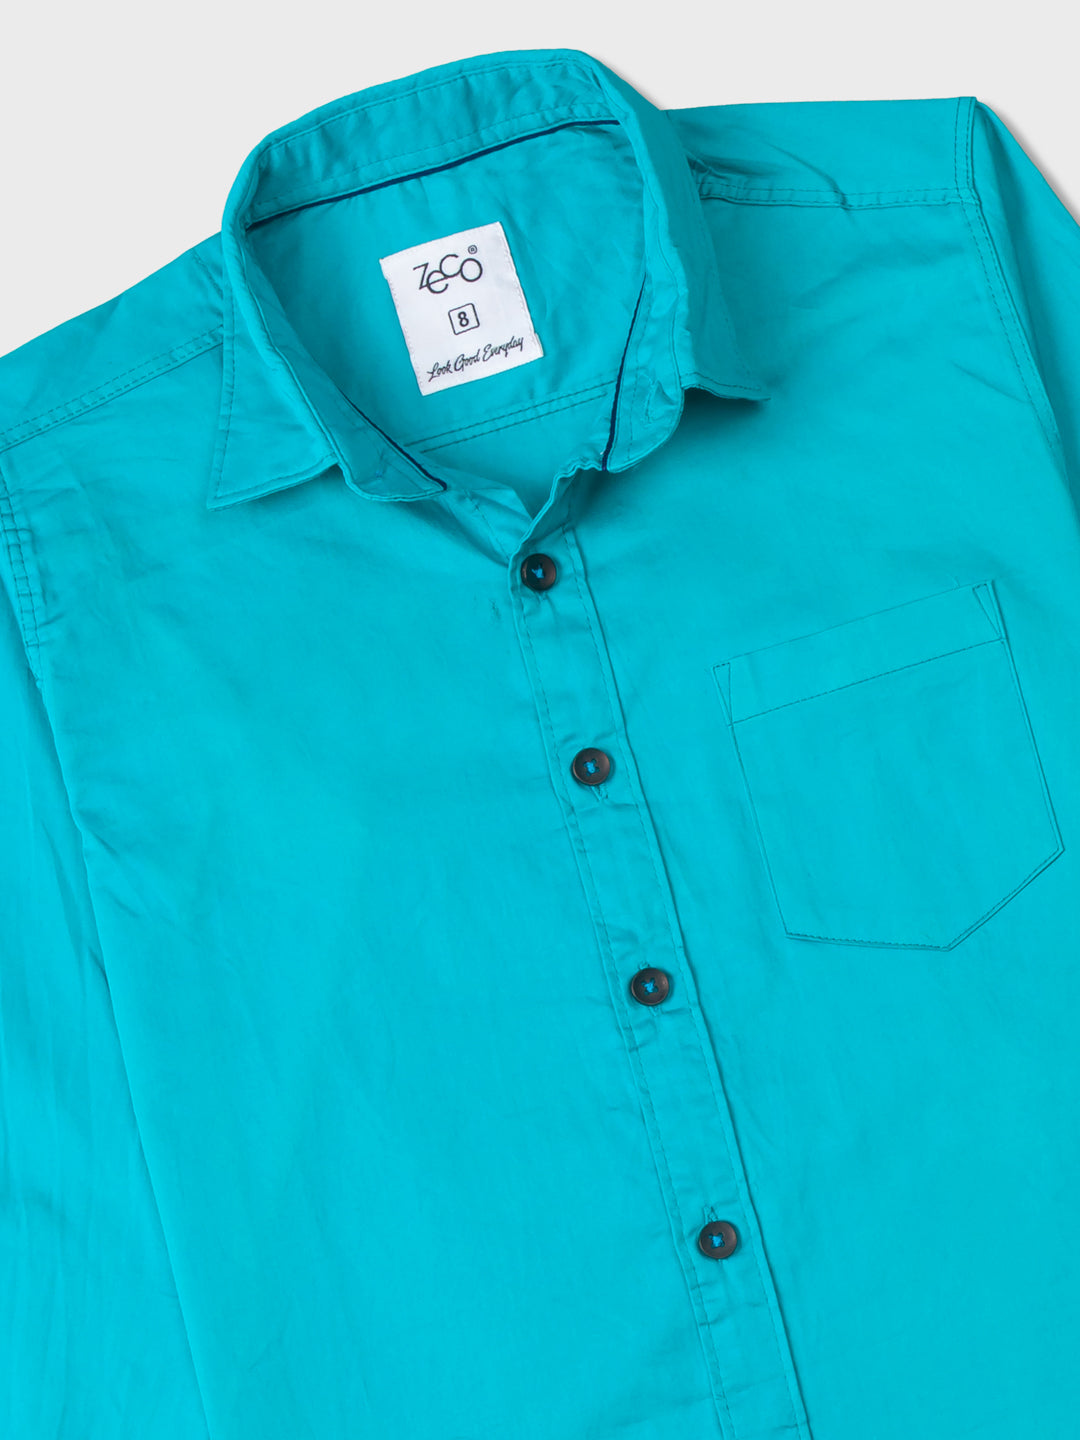 Kid's Solid Turquoise Shirt